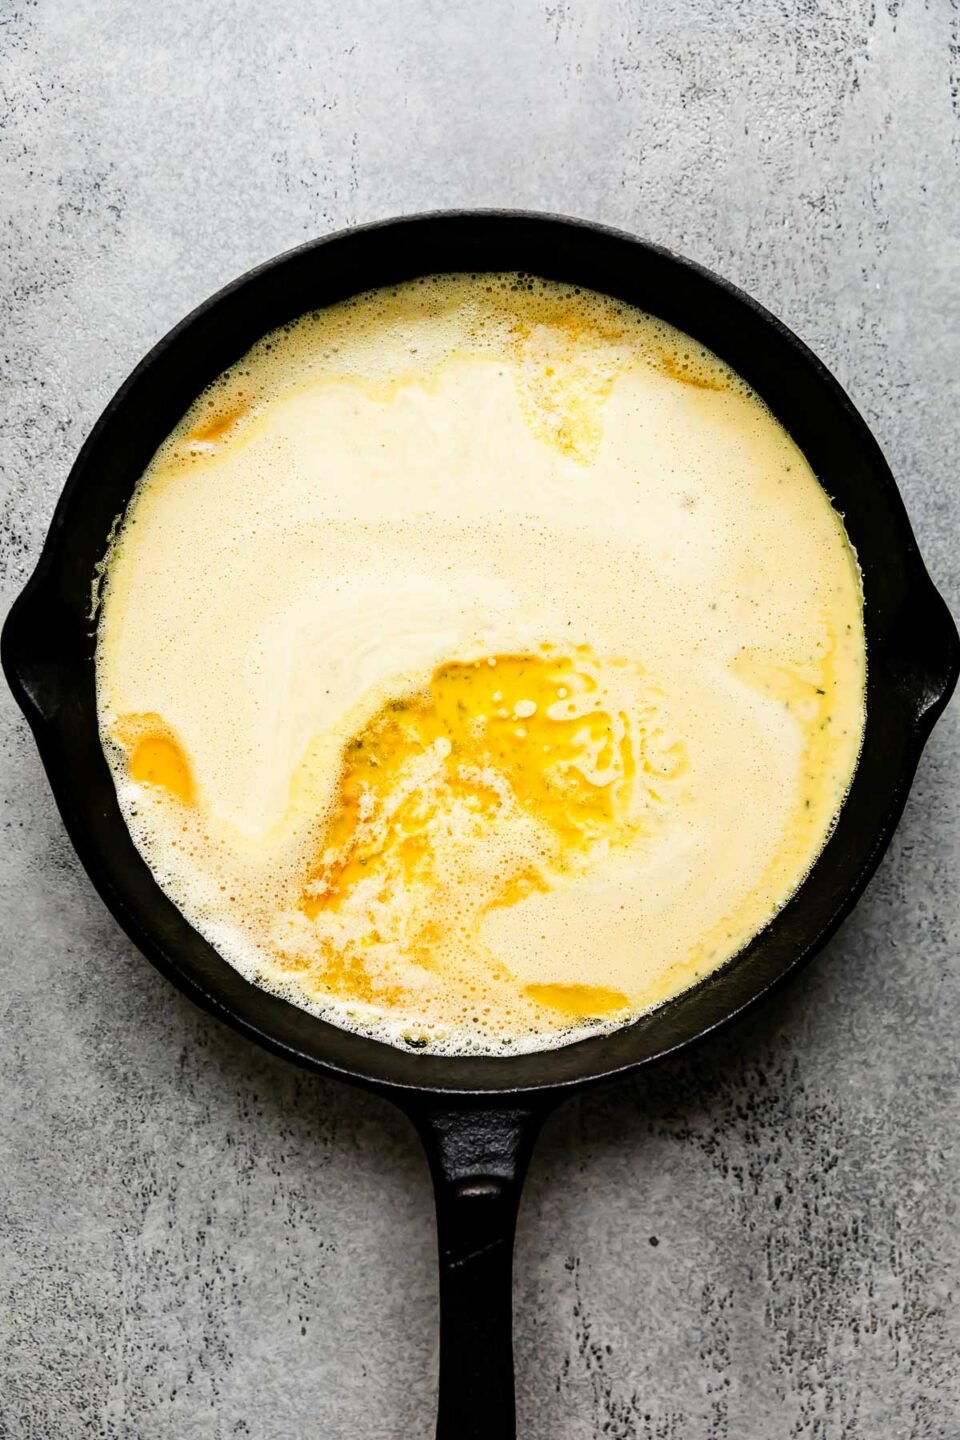 Savory dutch baby batter is poured into a large preheated cast iron skillet that sits atop a light gray textured surface.